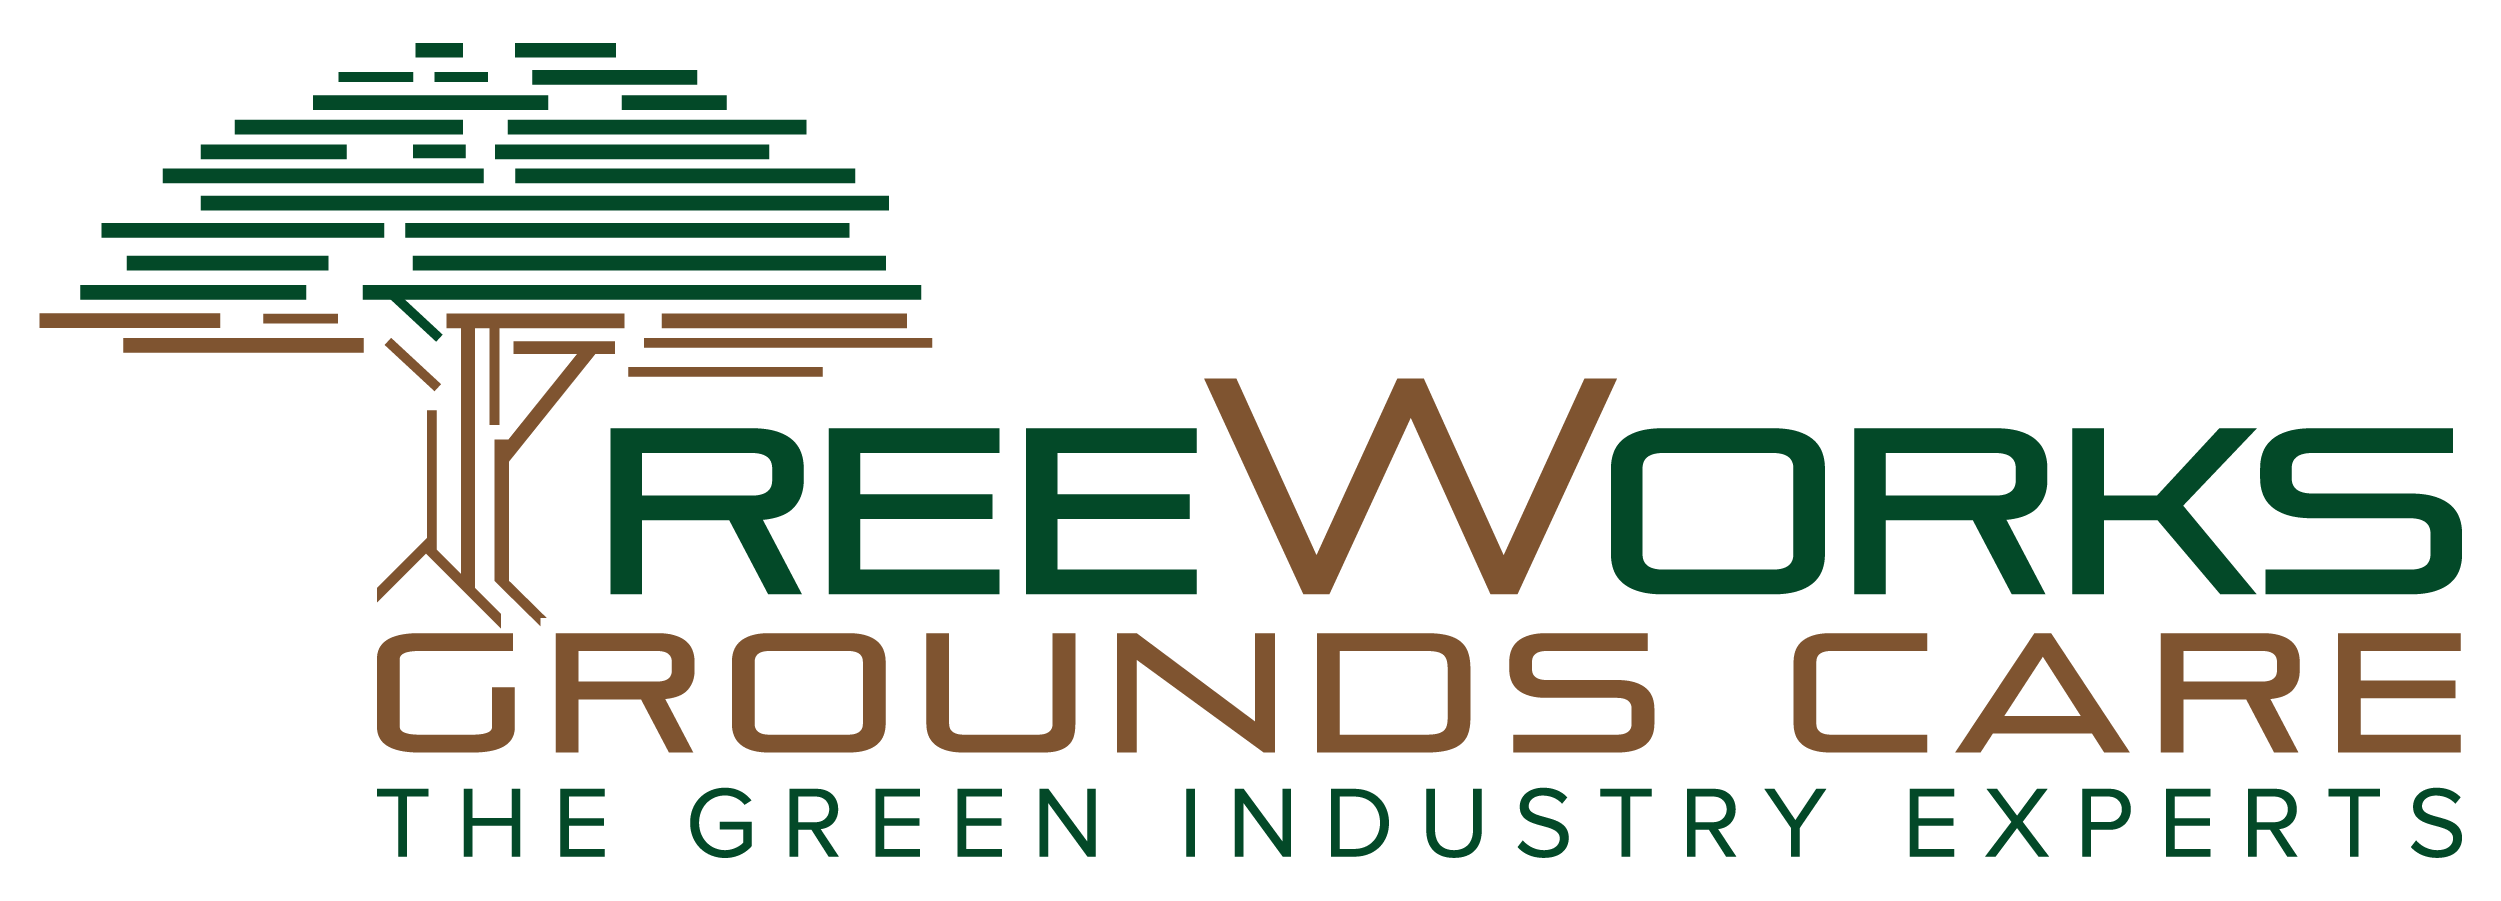 Tree Works Grounds Care